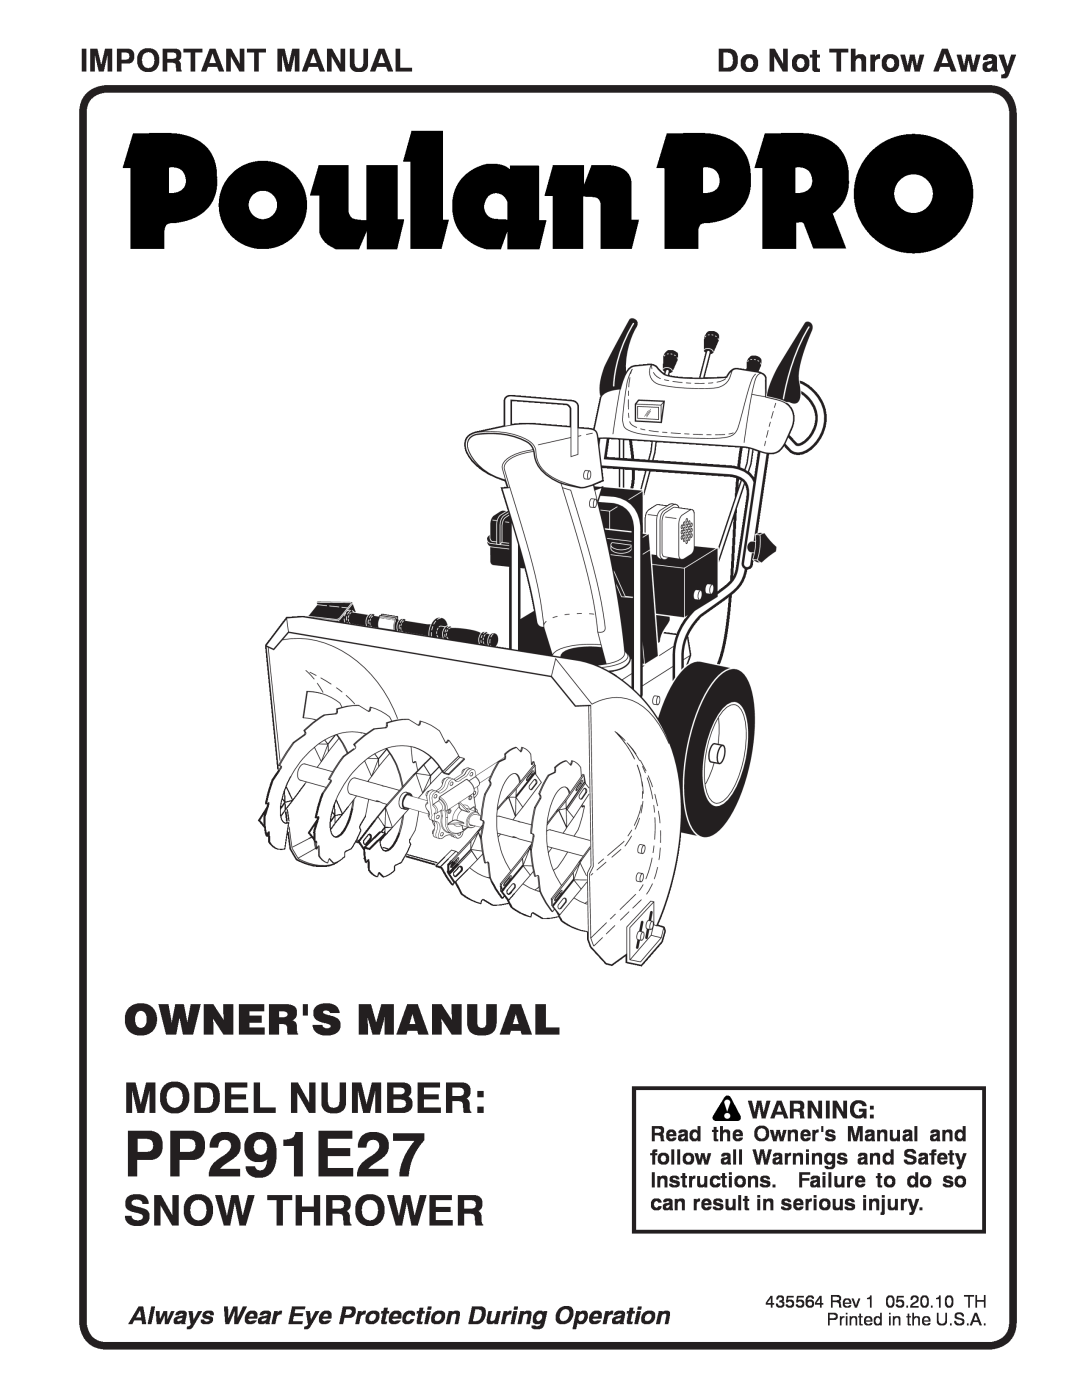 Poulan 96198003600, 435564 owner manual Snow Thrower, Important Manual, PP291E27, Do Not Throw Away 